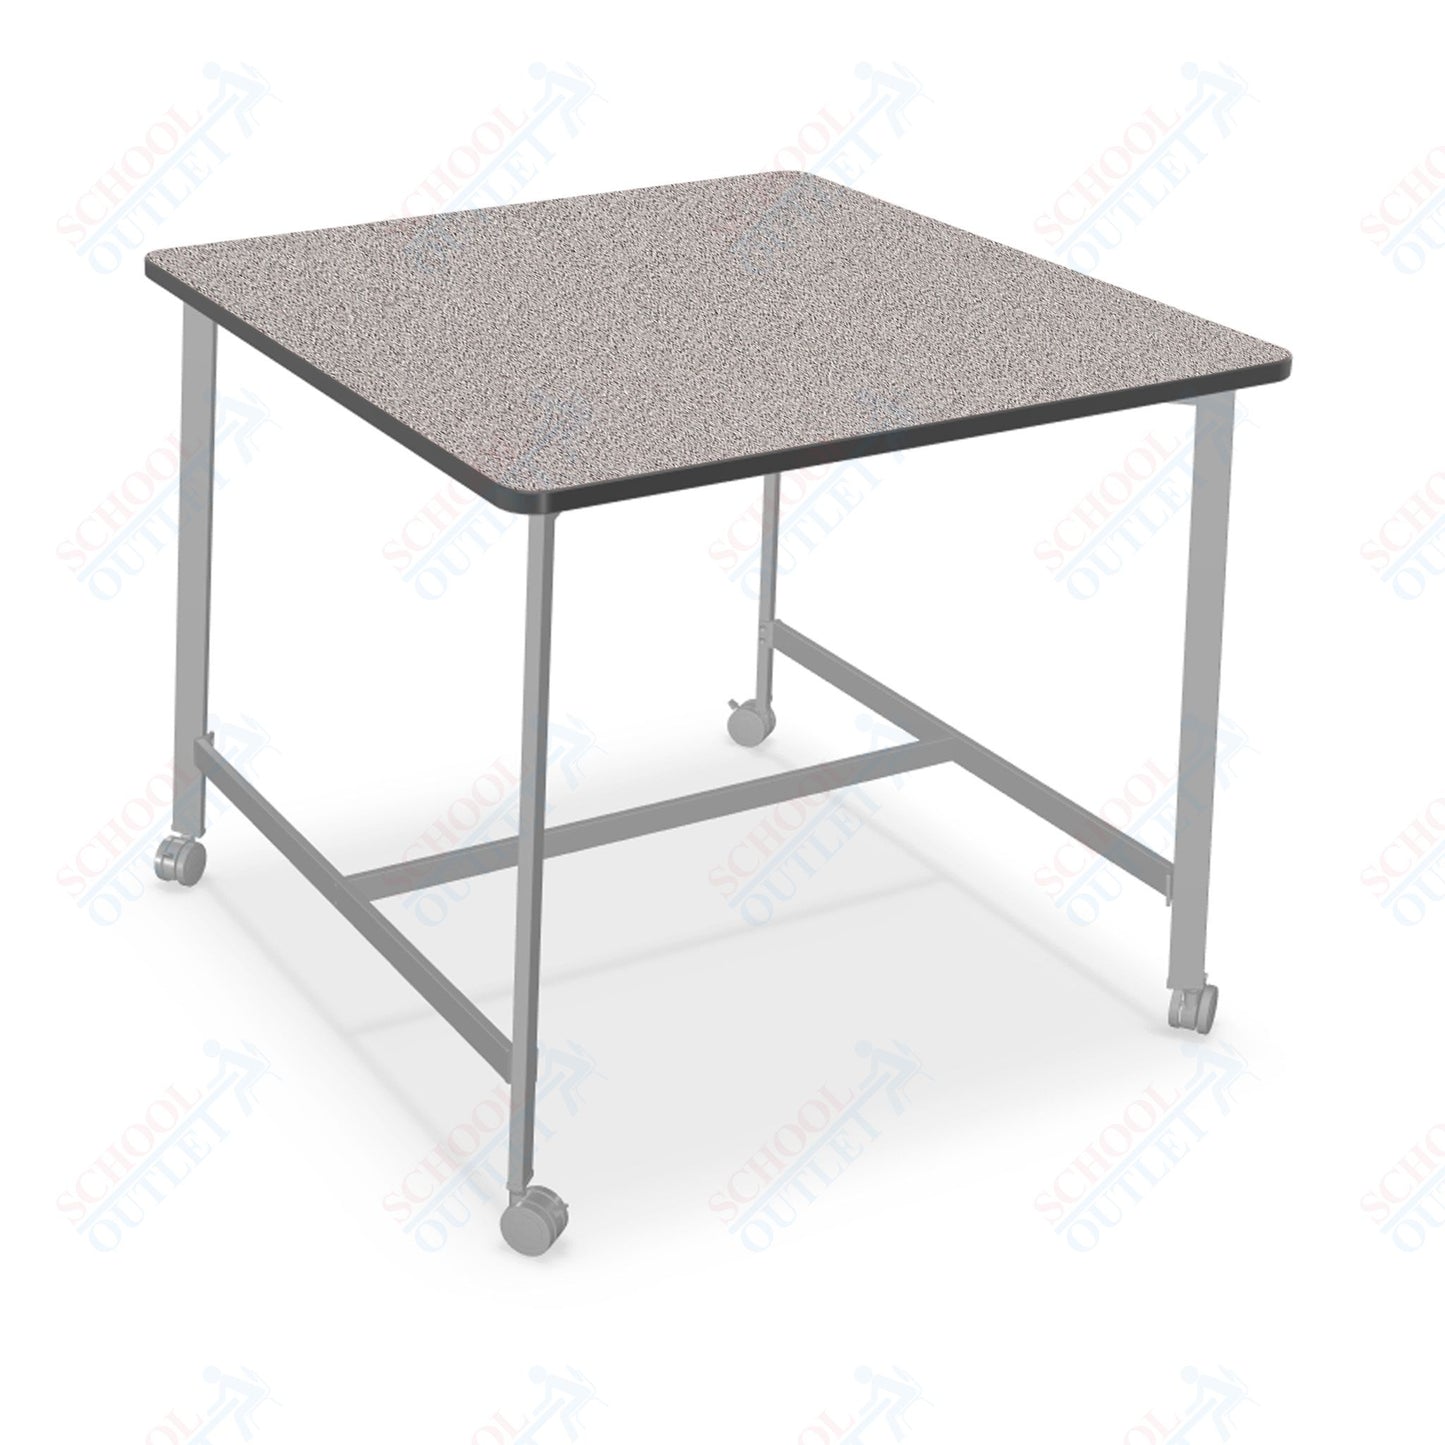 Mooreco Akt Table – 48" Square, Laminate Top, Fixed Height Available in 29"H, 36"H, or 42"H